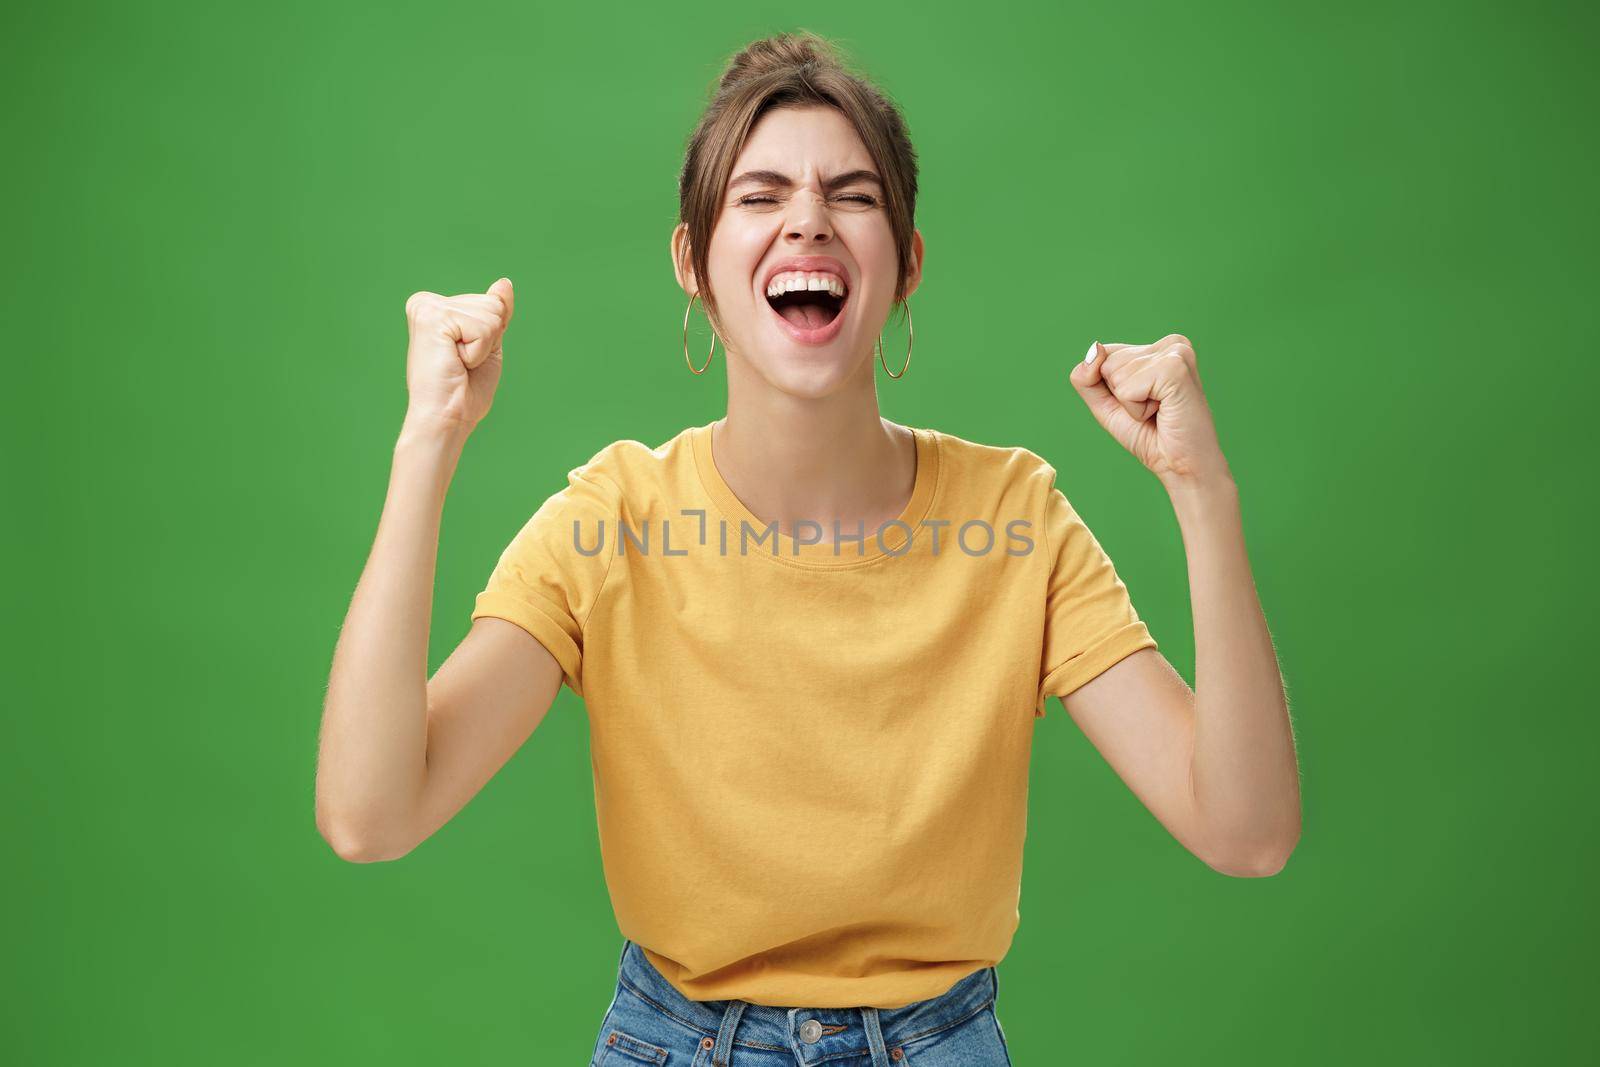 Waist-up shot of charismatic energized and excited female in yellow t-shirt closing eyes yelling from joy and happiness raising hands in cheer celebrating successful news over green background. Lifestyle.